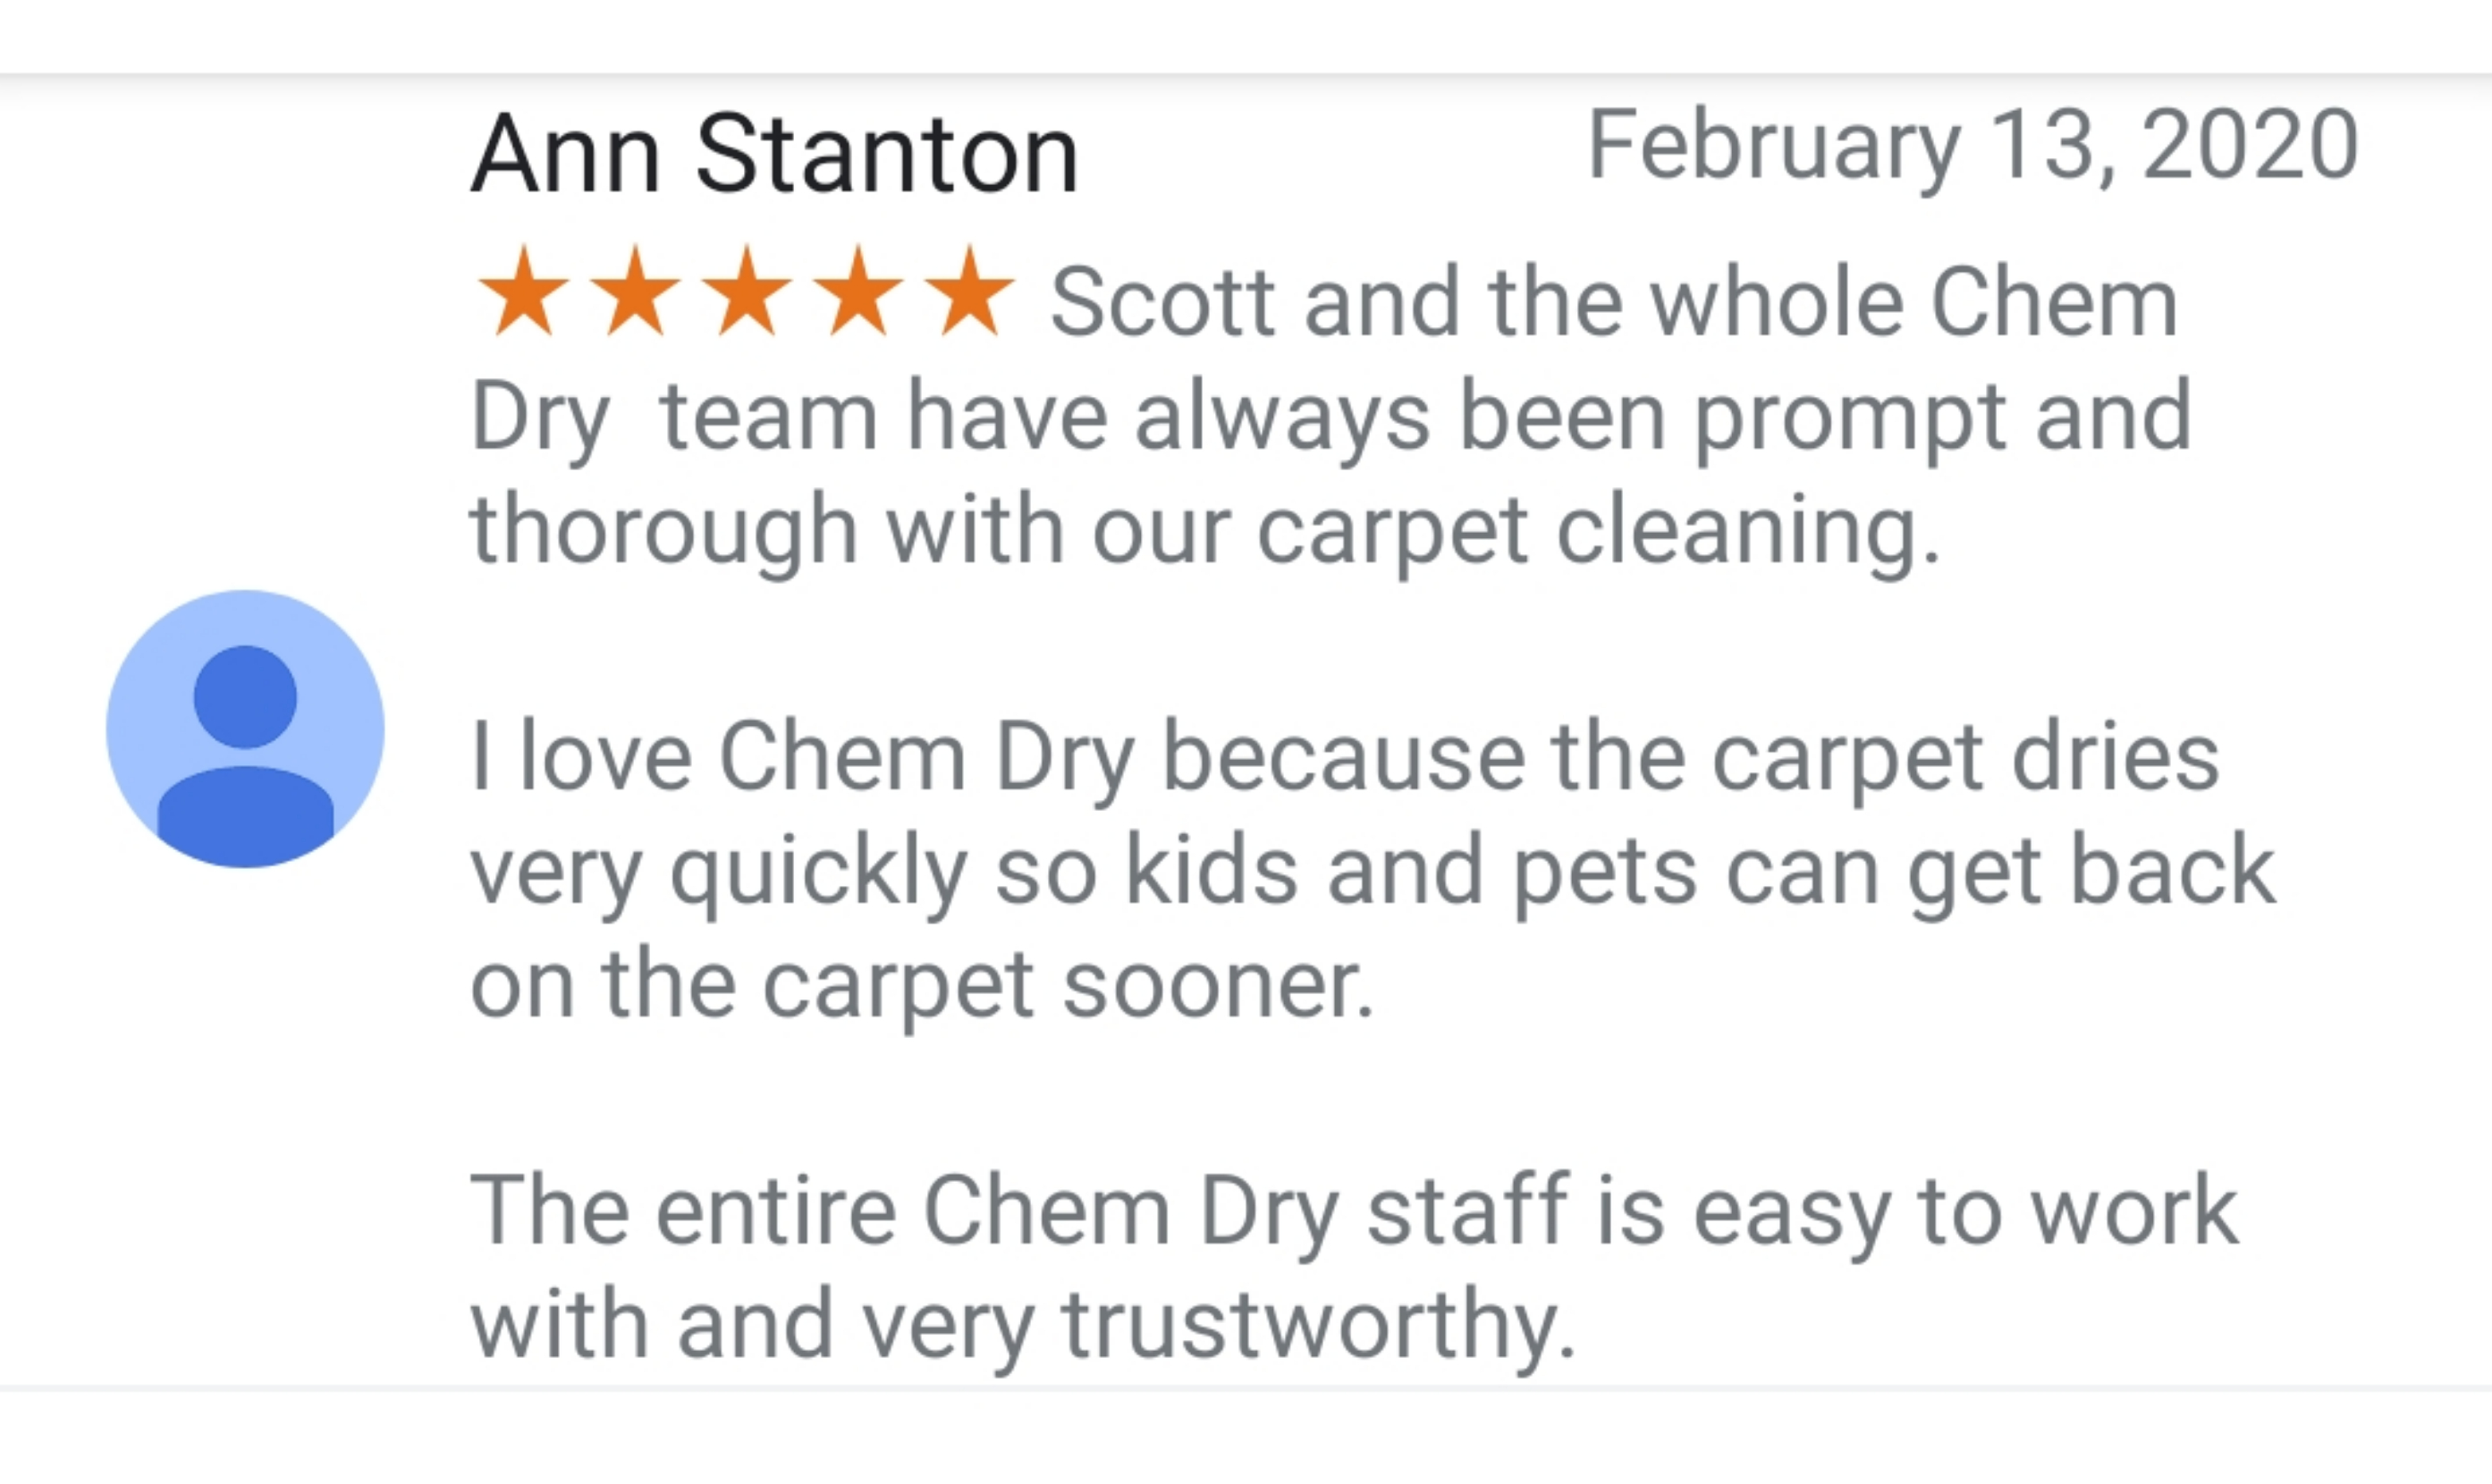 Columbus Chem-Dry is your trusted carpet and upholstery cleaning service provider